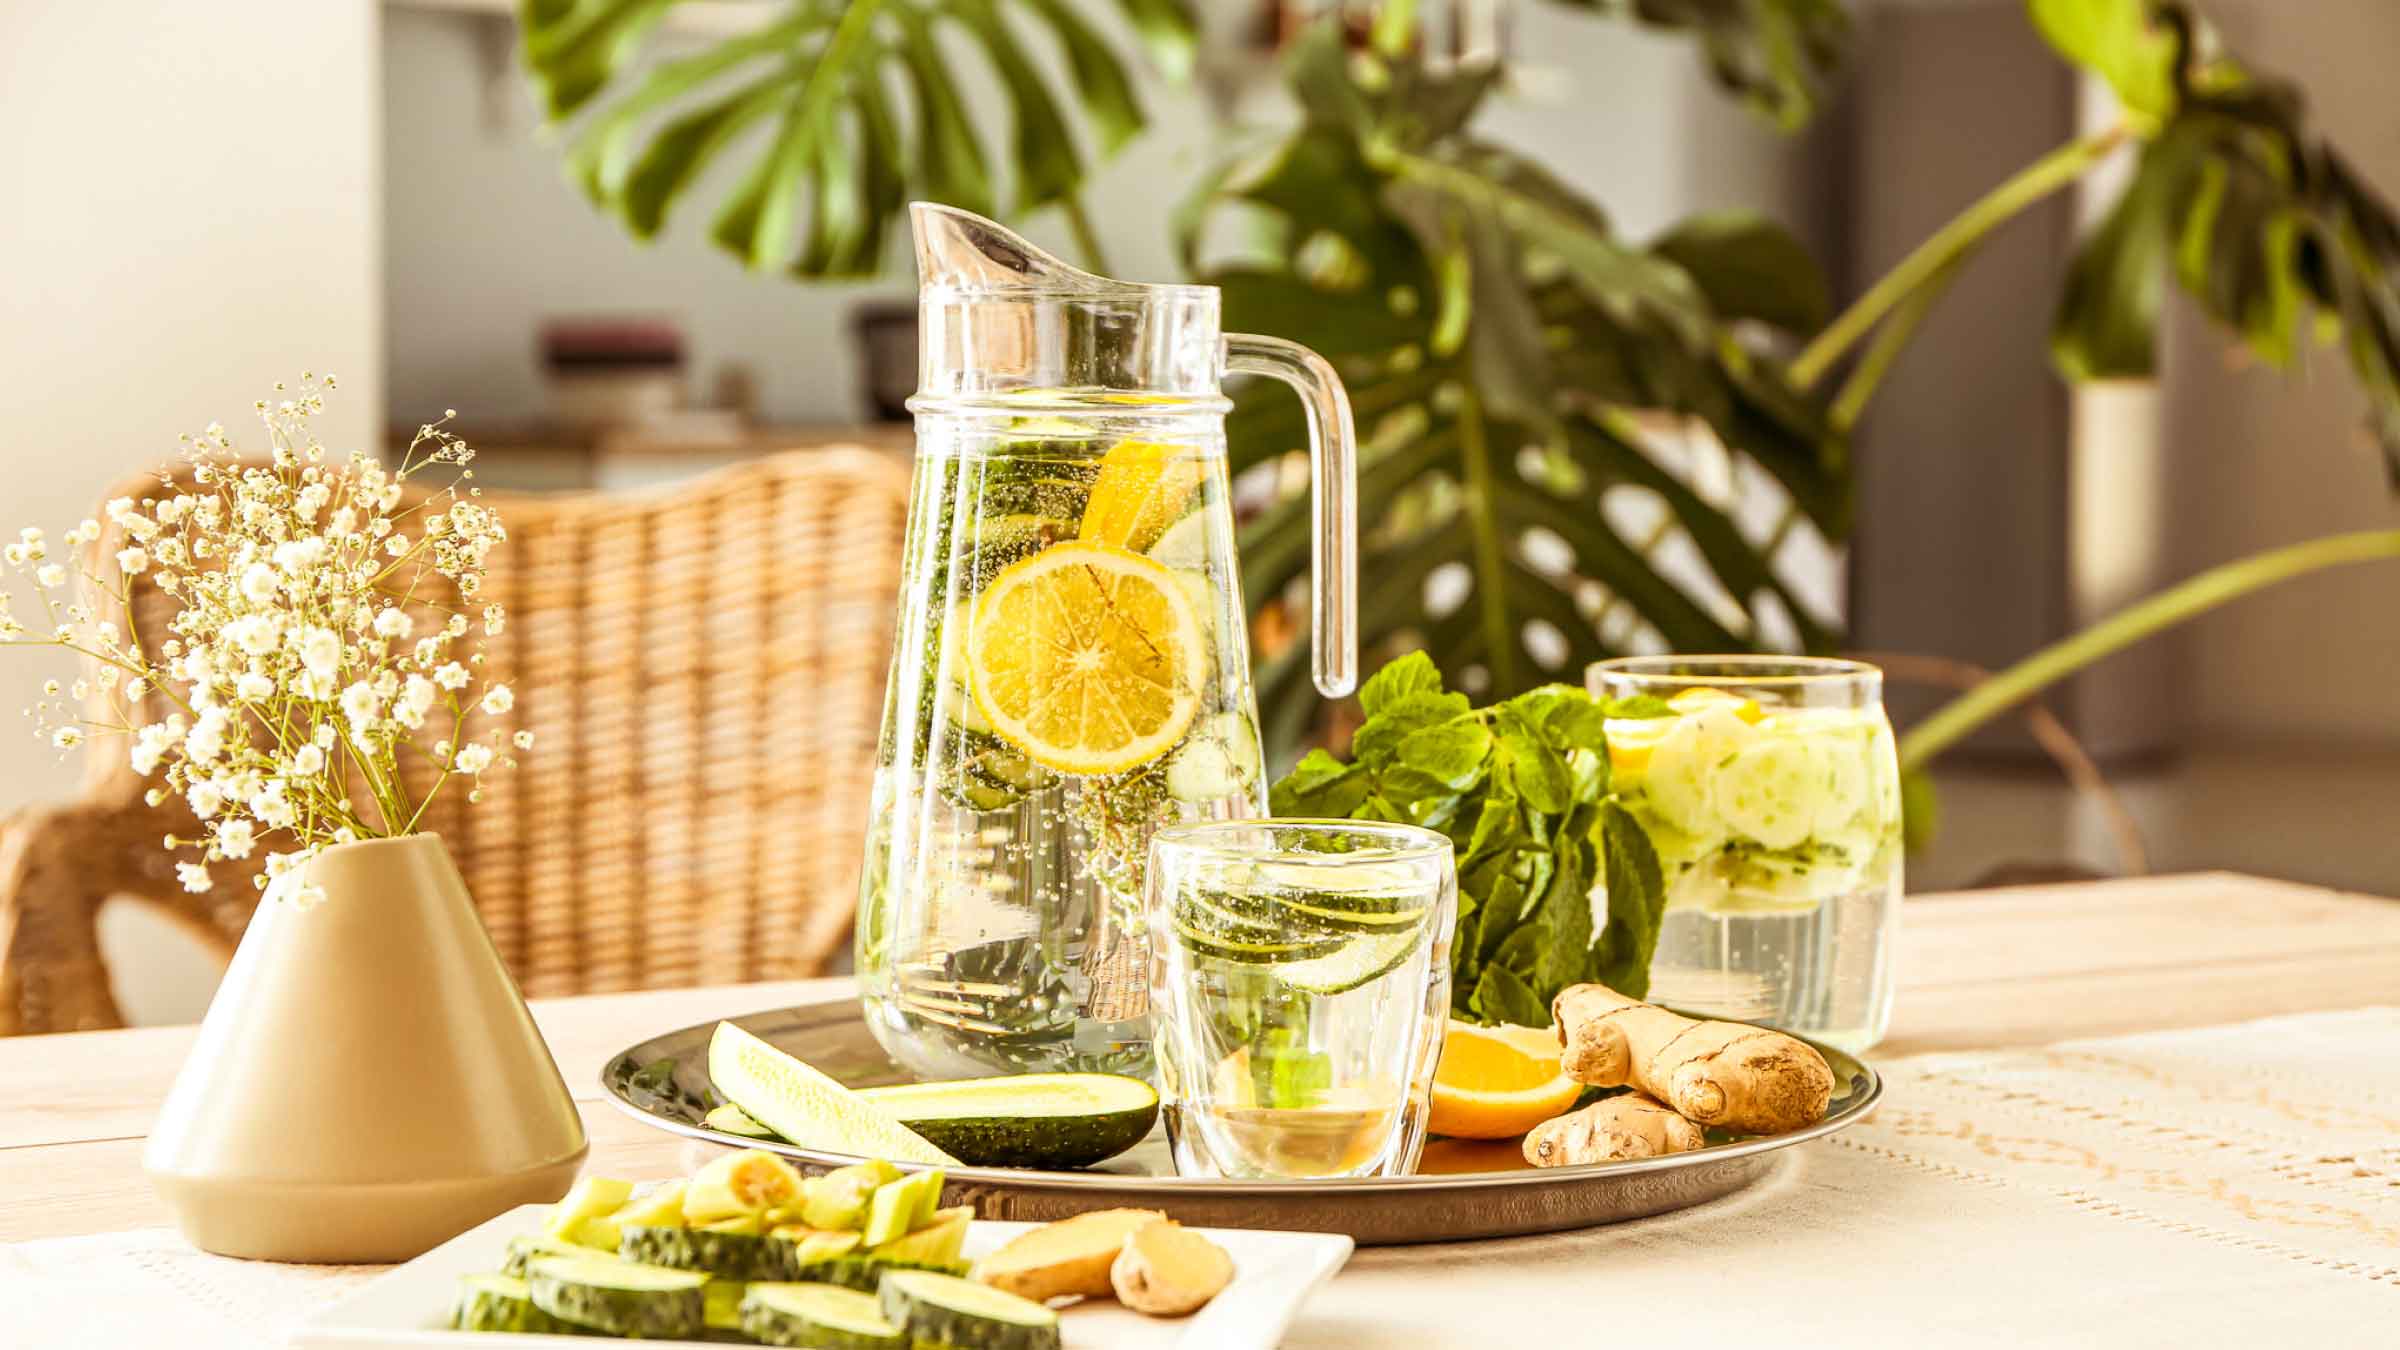 Table with a centrepiece of a tall jug and two glasses filled with water and slices of lemon and mint. Monsteria in the background.